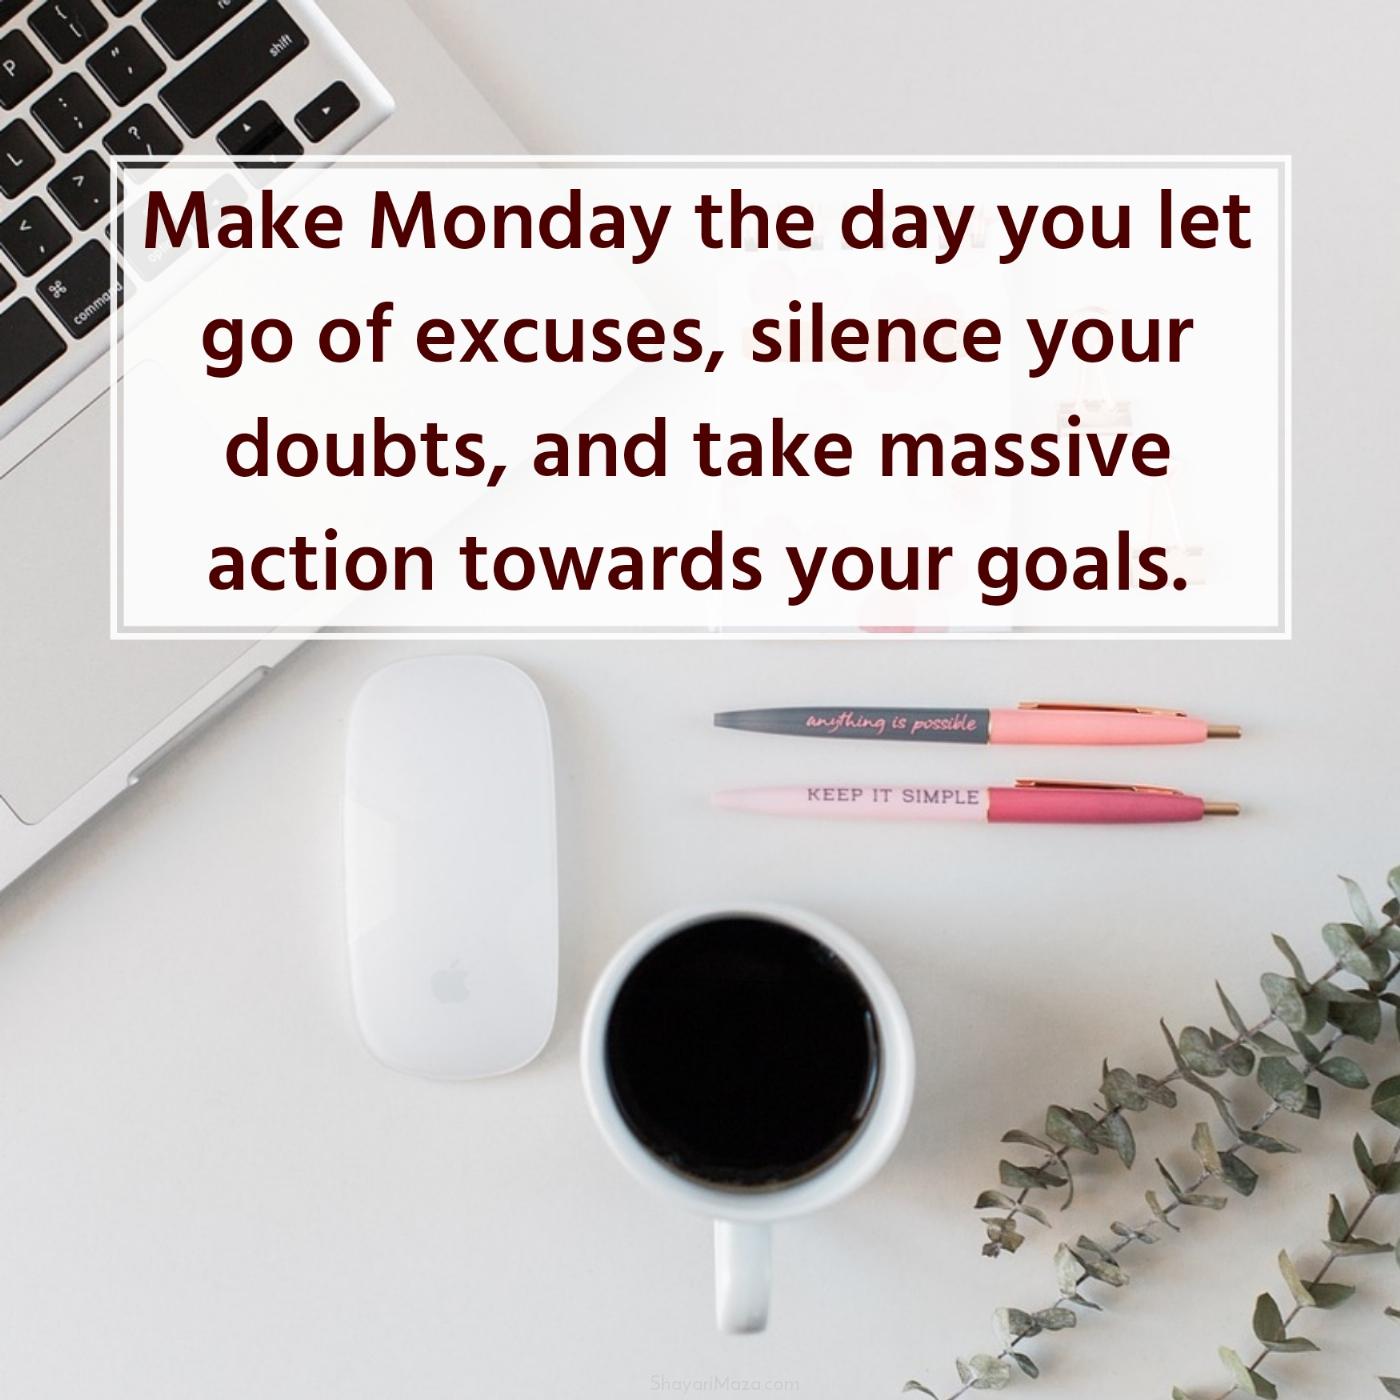 Make Monday the day you let go of excuses